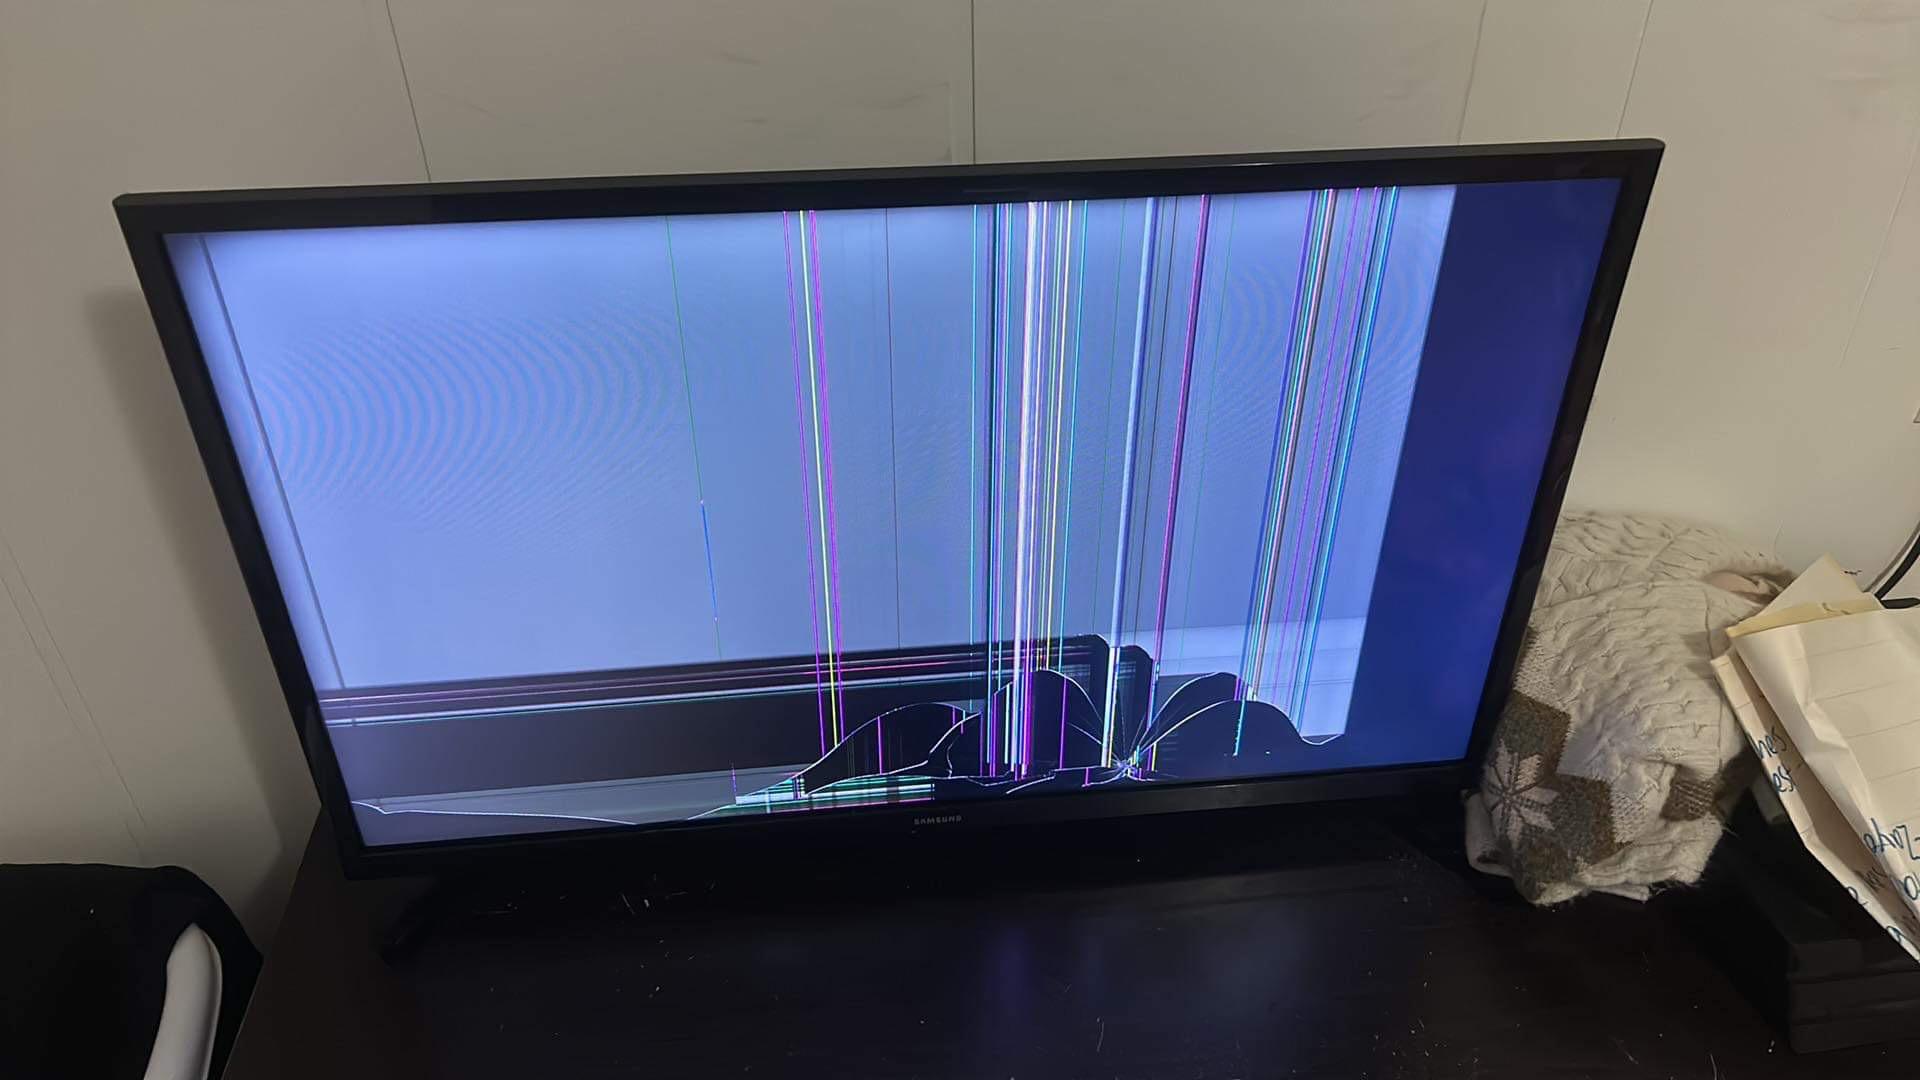 r/mildlyinfuriating - My toddler has smashed yet another television.